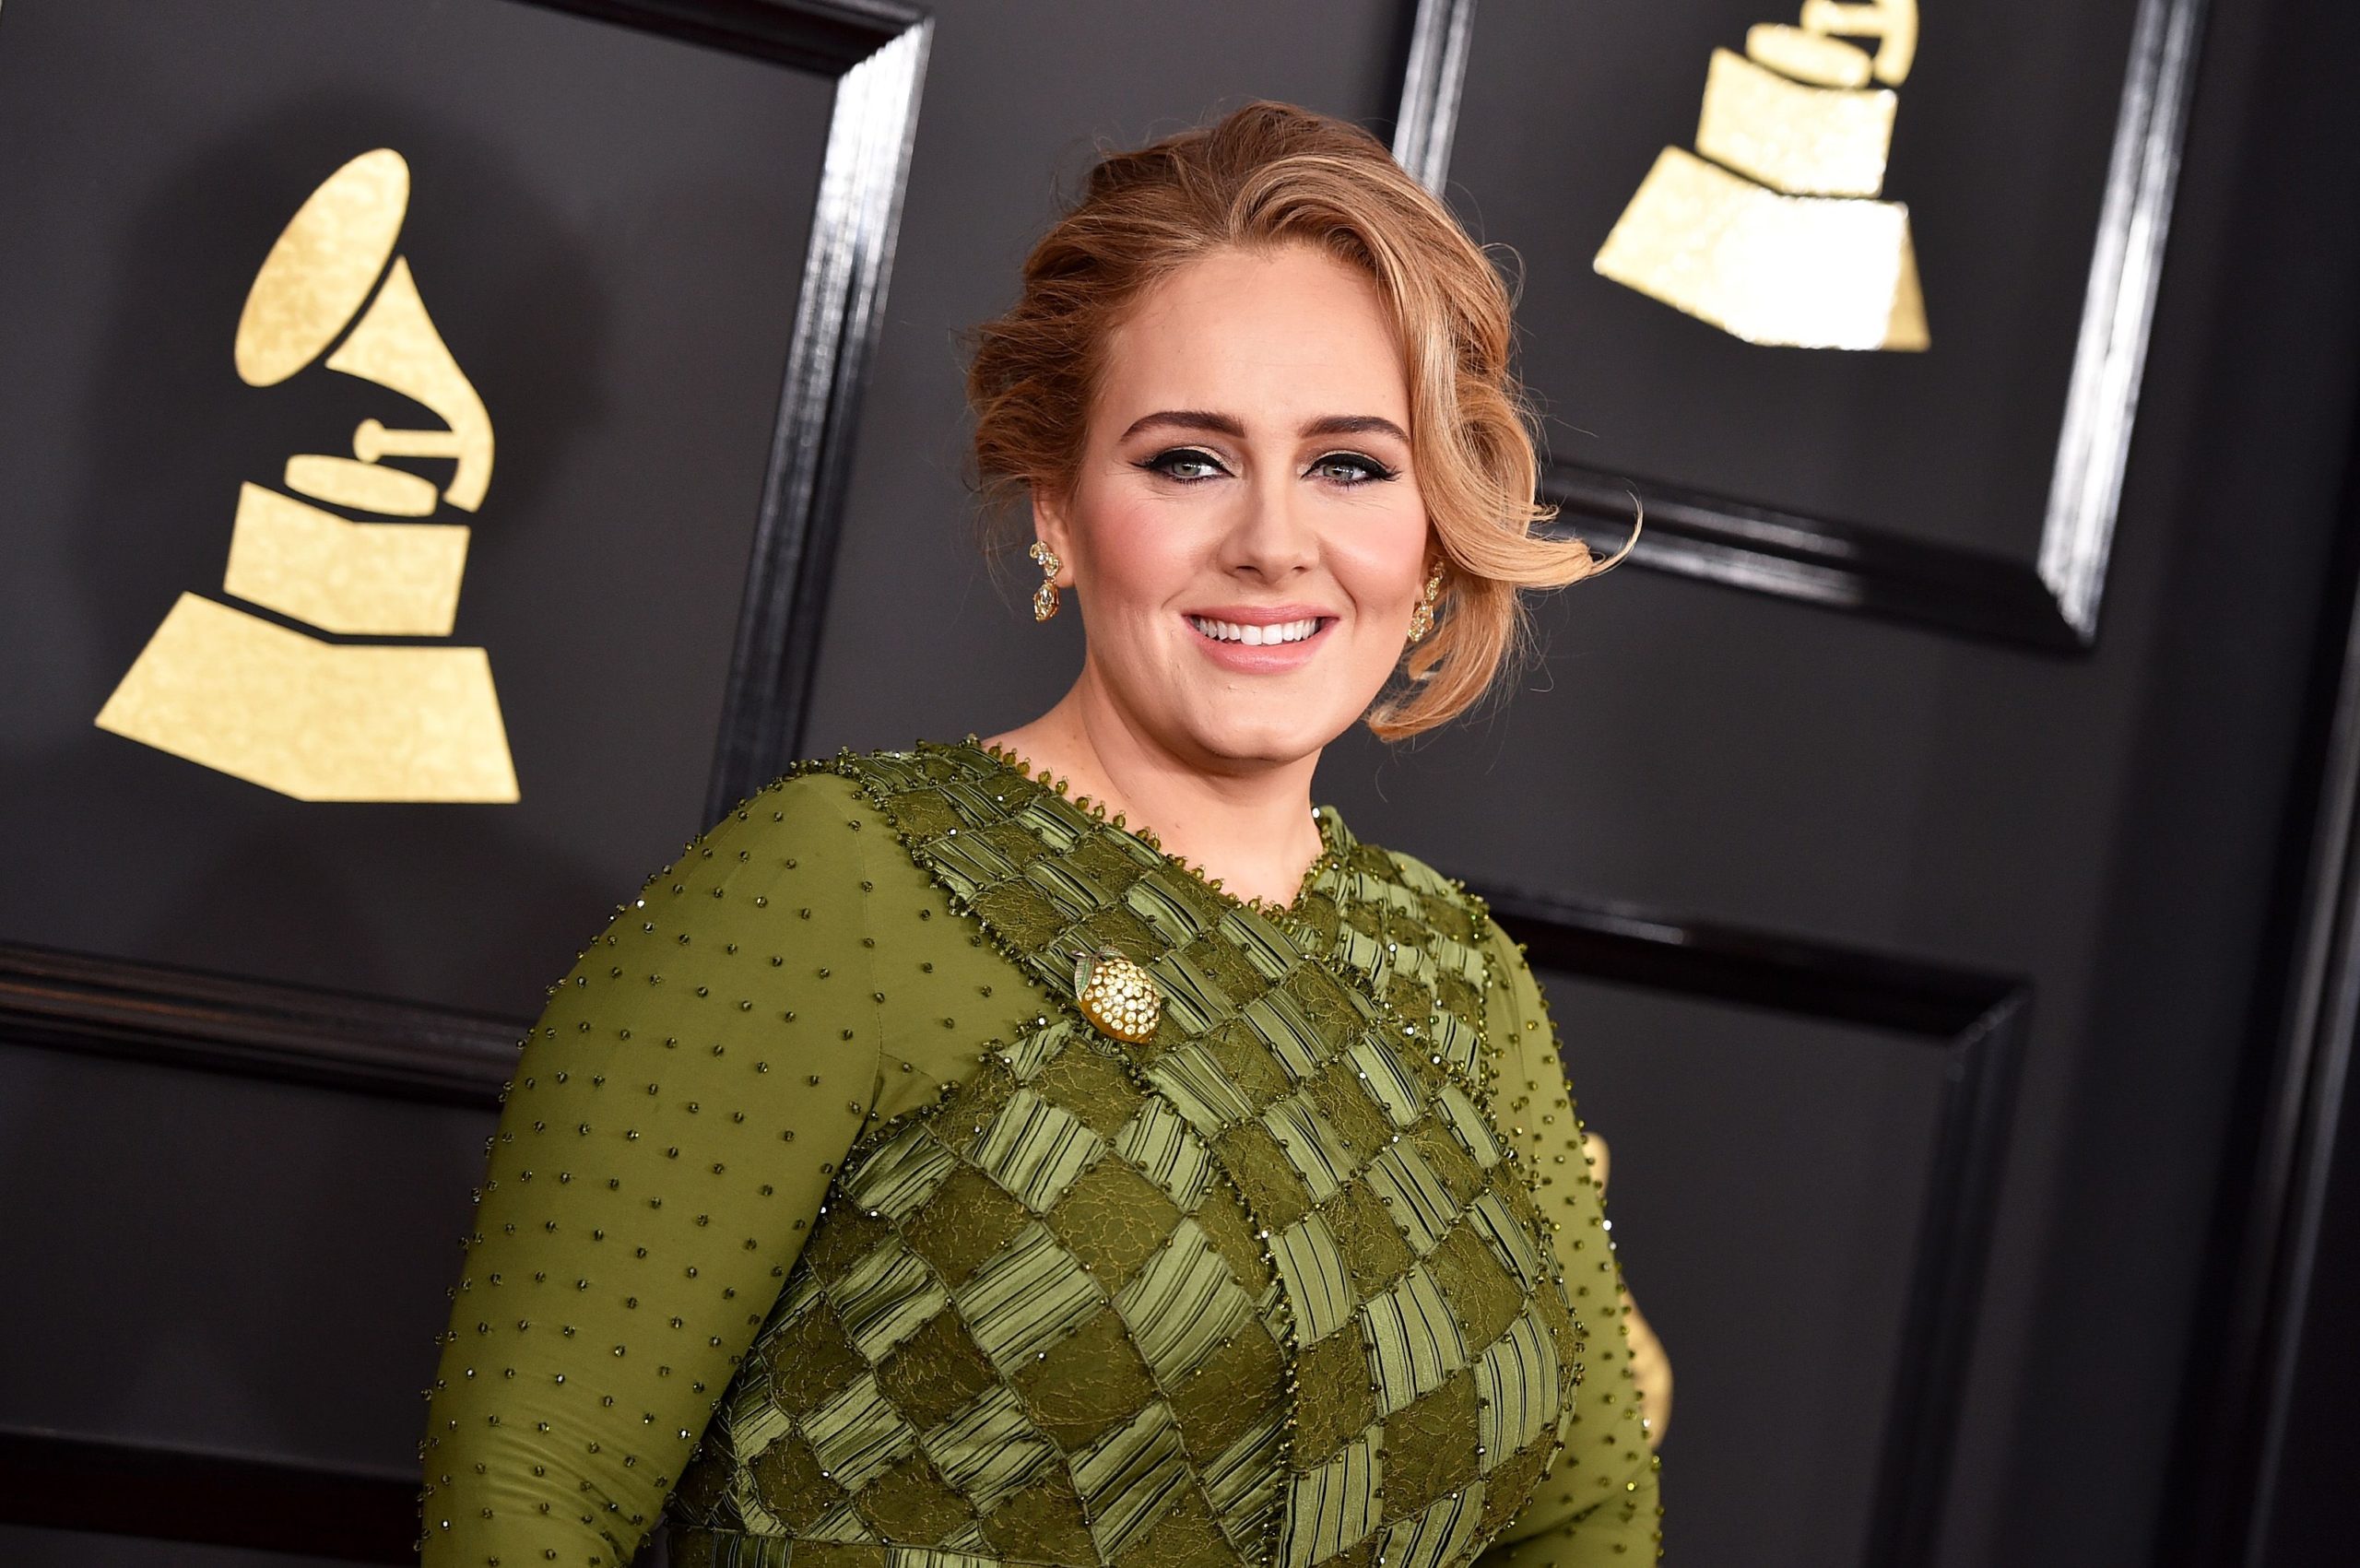 What is Adele's net worth 2020?